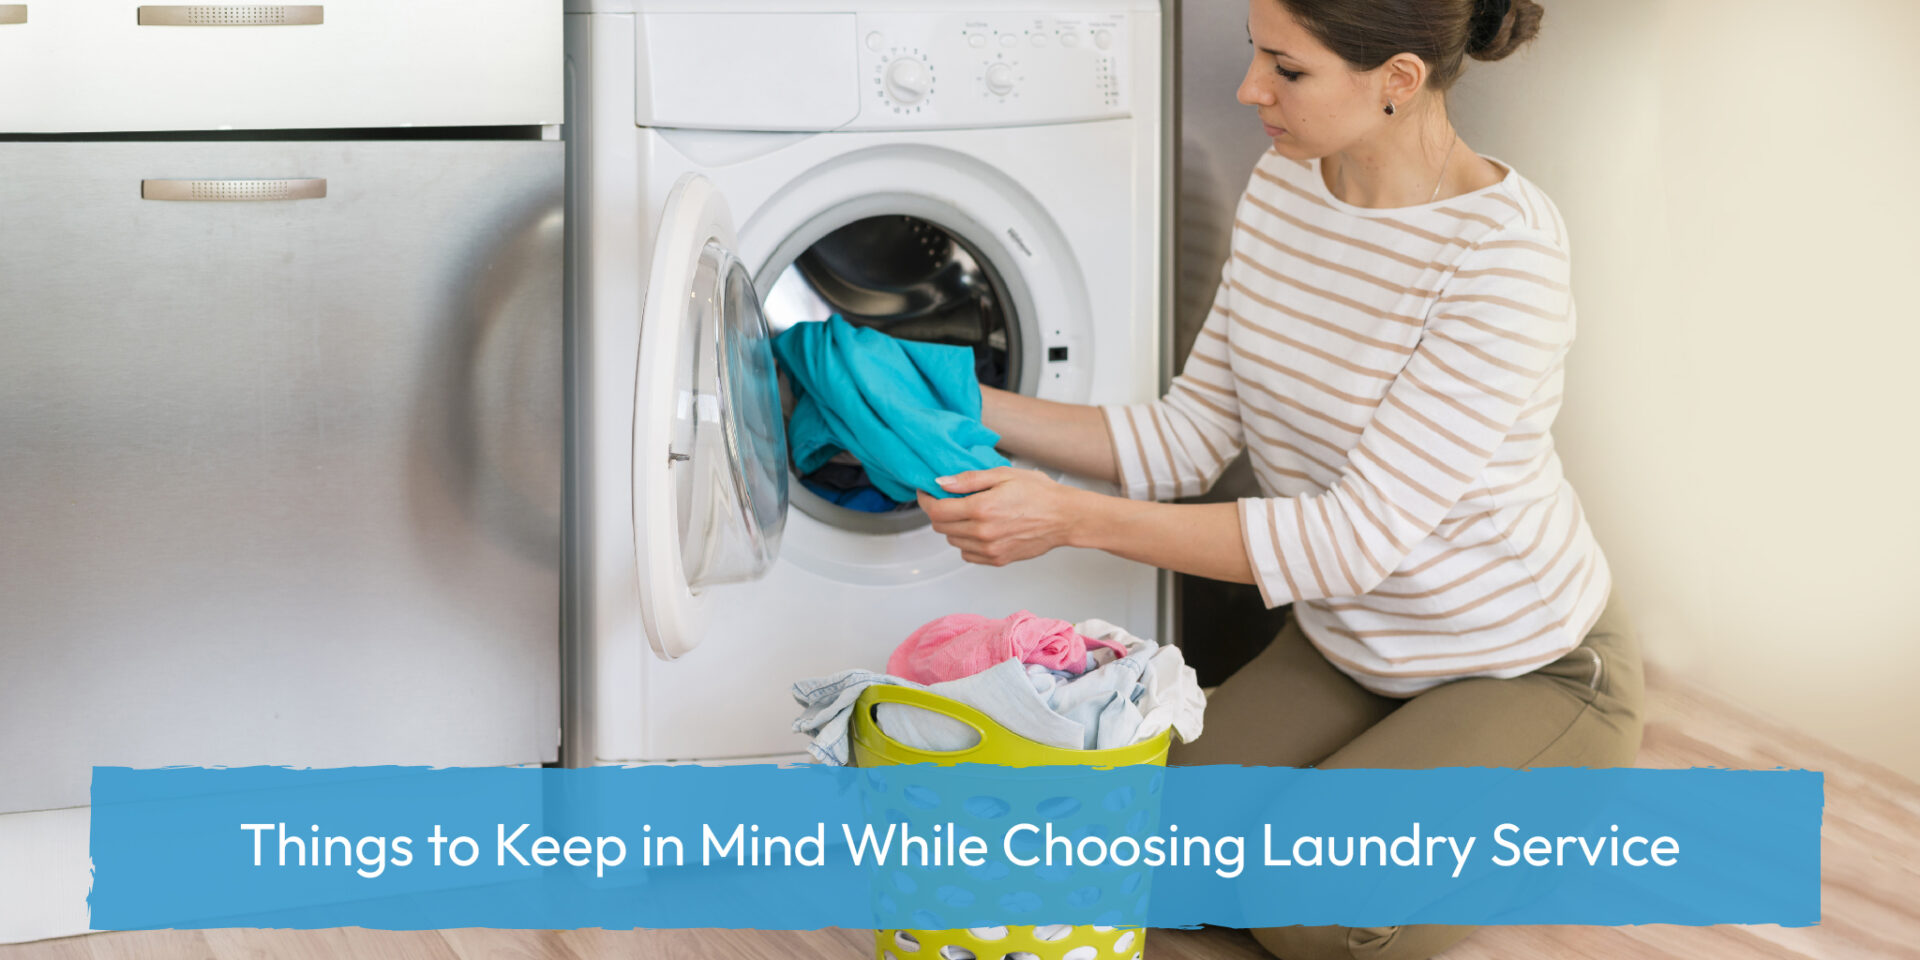 Things to Keep in Mind While Choosing Laundry Service